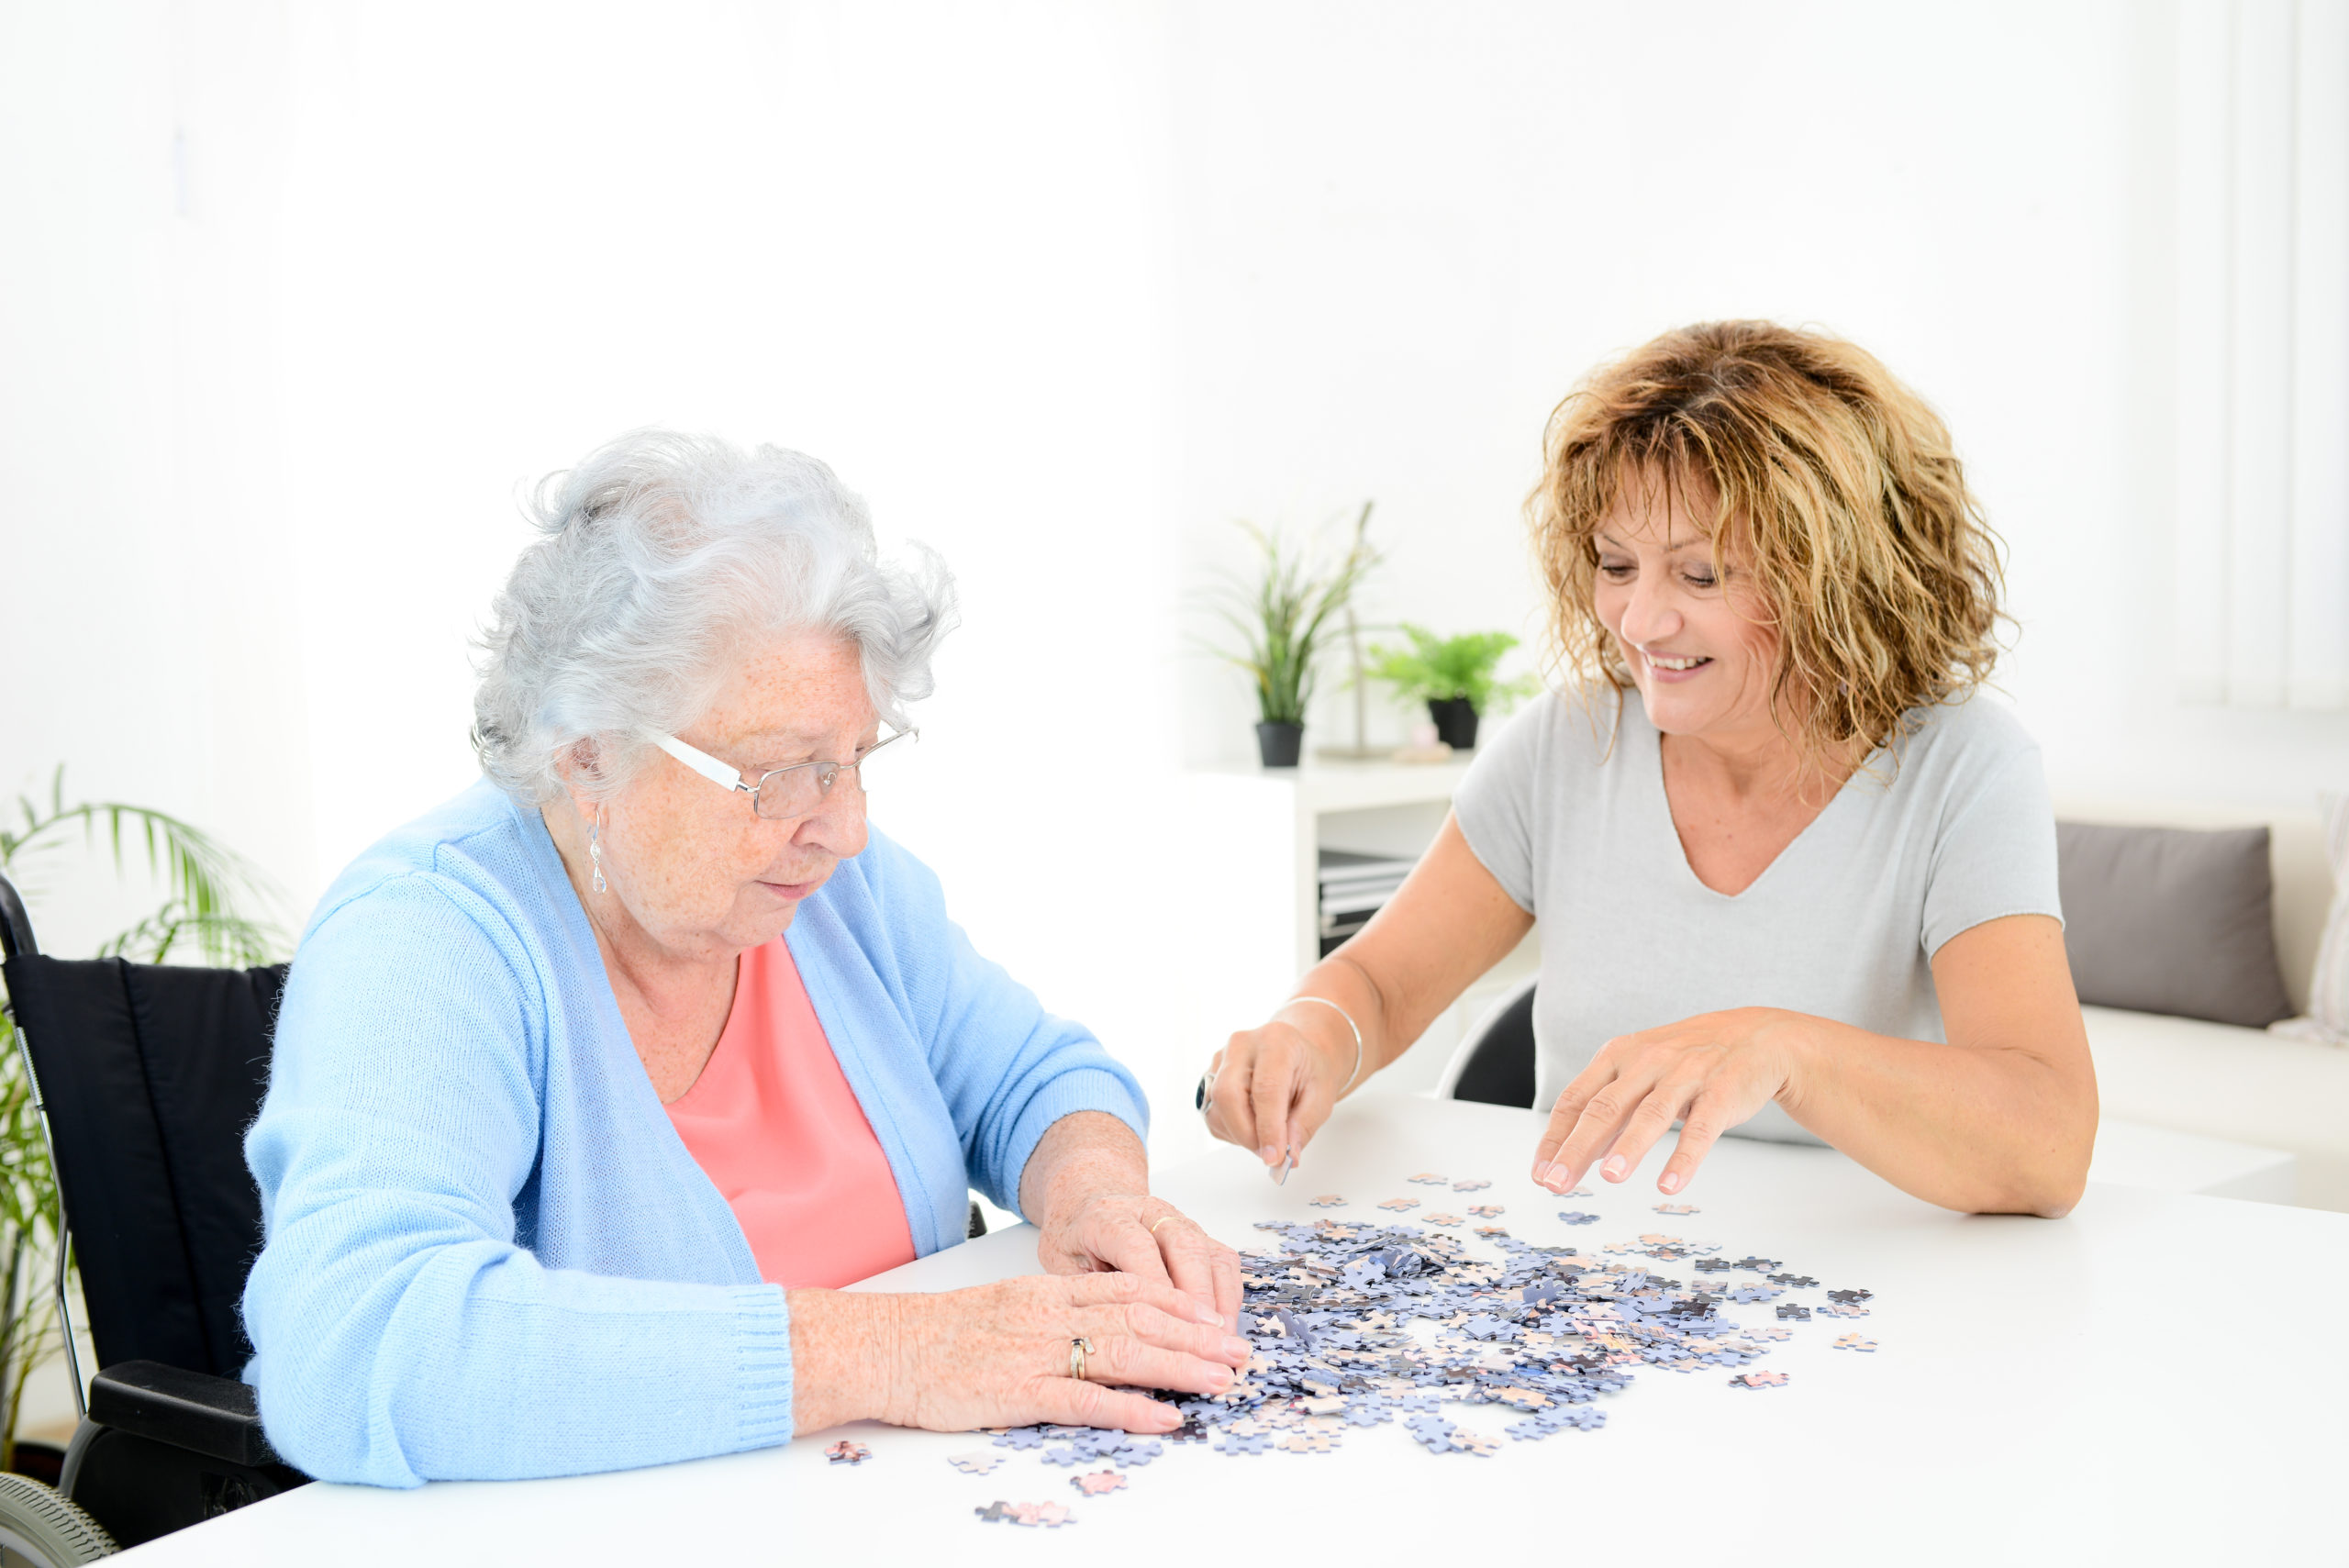 Senior woman and caregiver enjoying a puzzle together